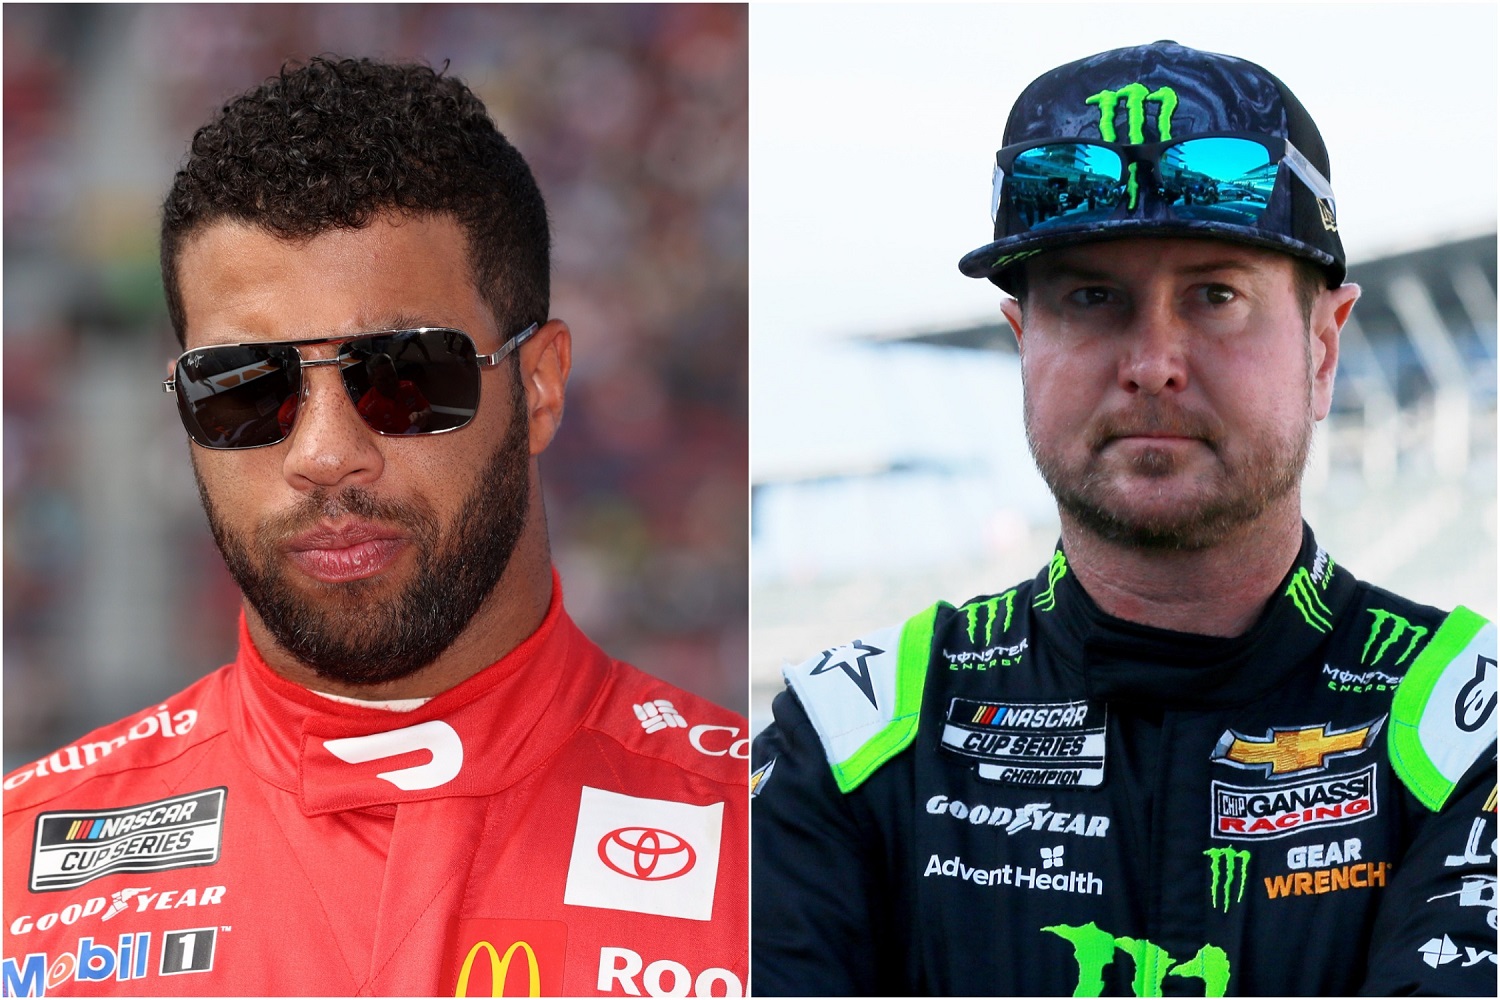 Bubba Wallace and Kurt Busch will be teammates at 23XI Racing for the 2022 NASCAR Cup Series season. | Getty Images